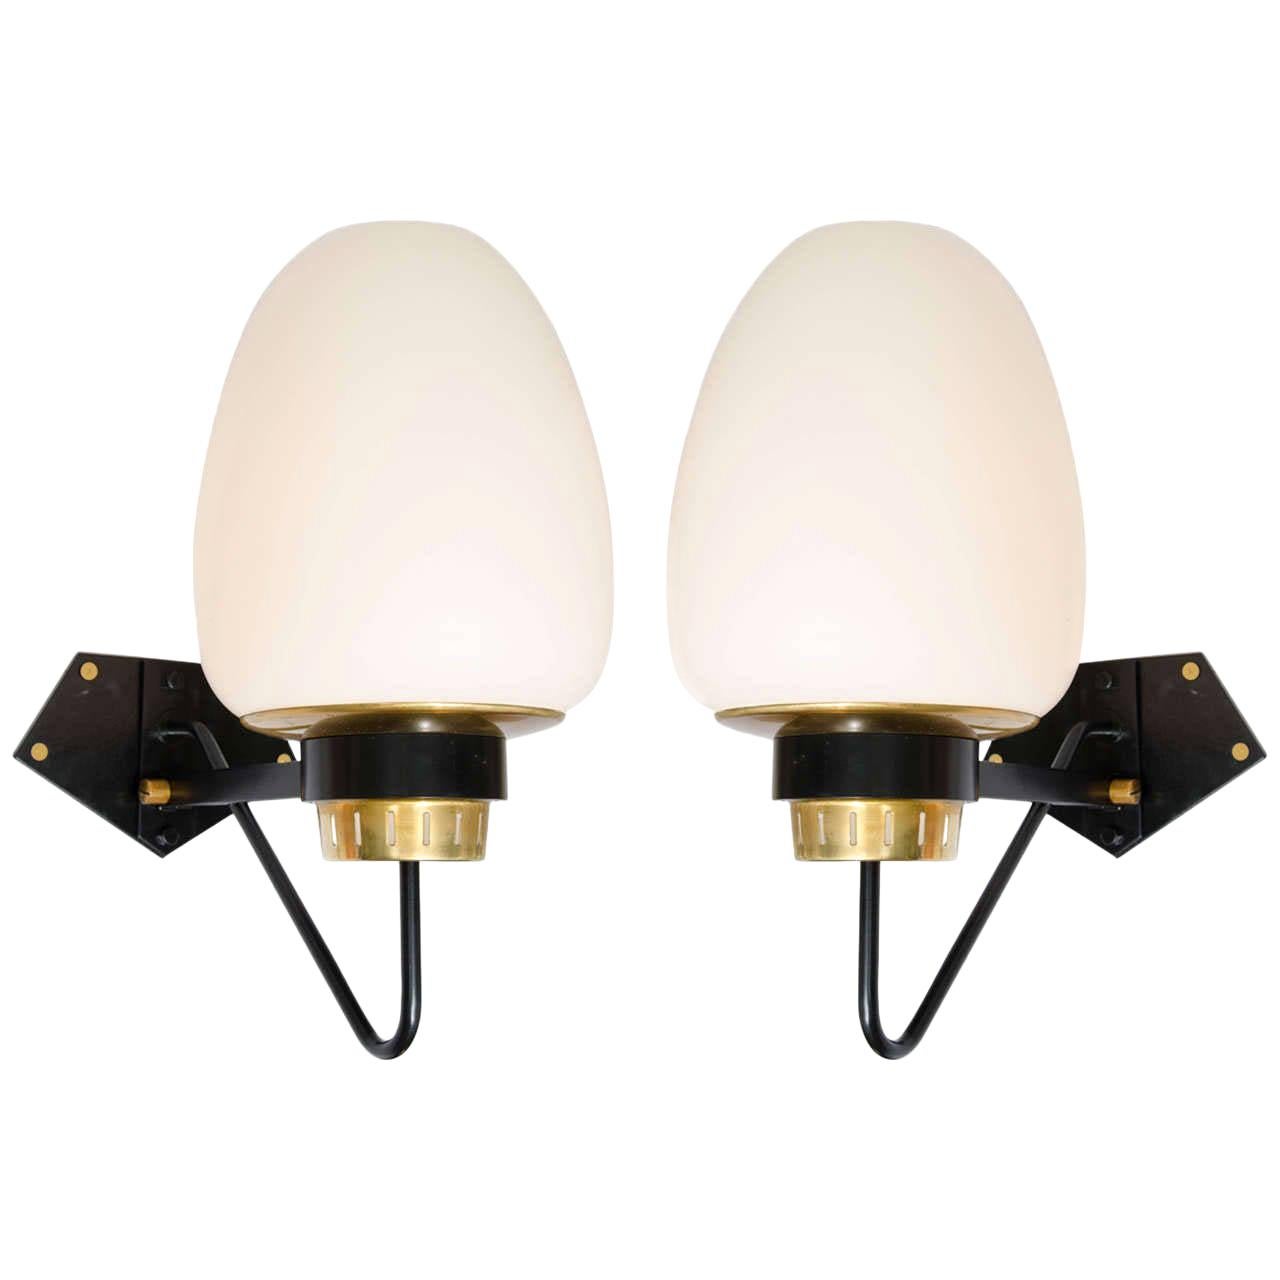 Pair of Large Opaline Wall Sconces on Black & Brass Frame